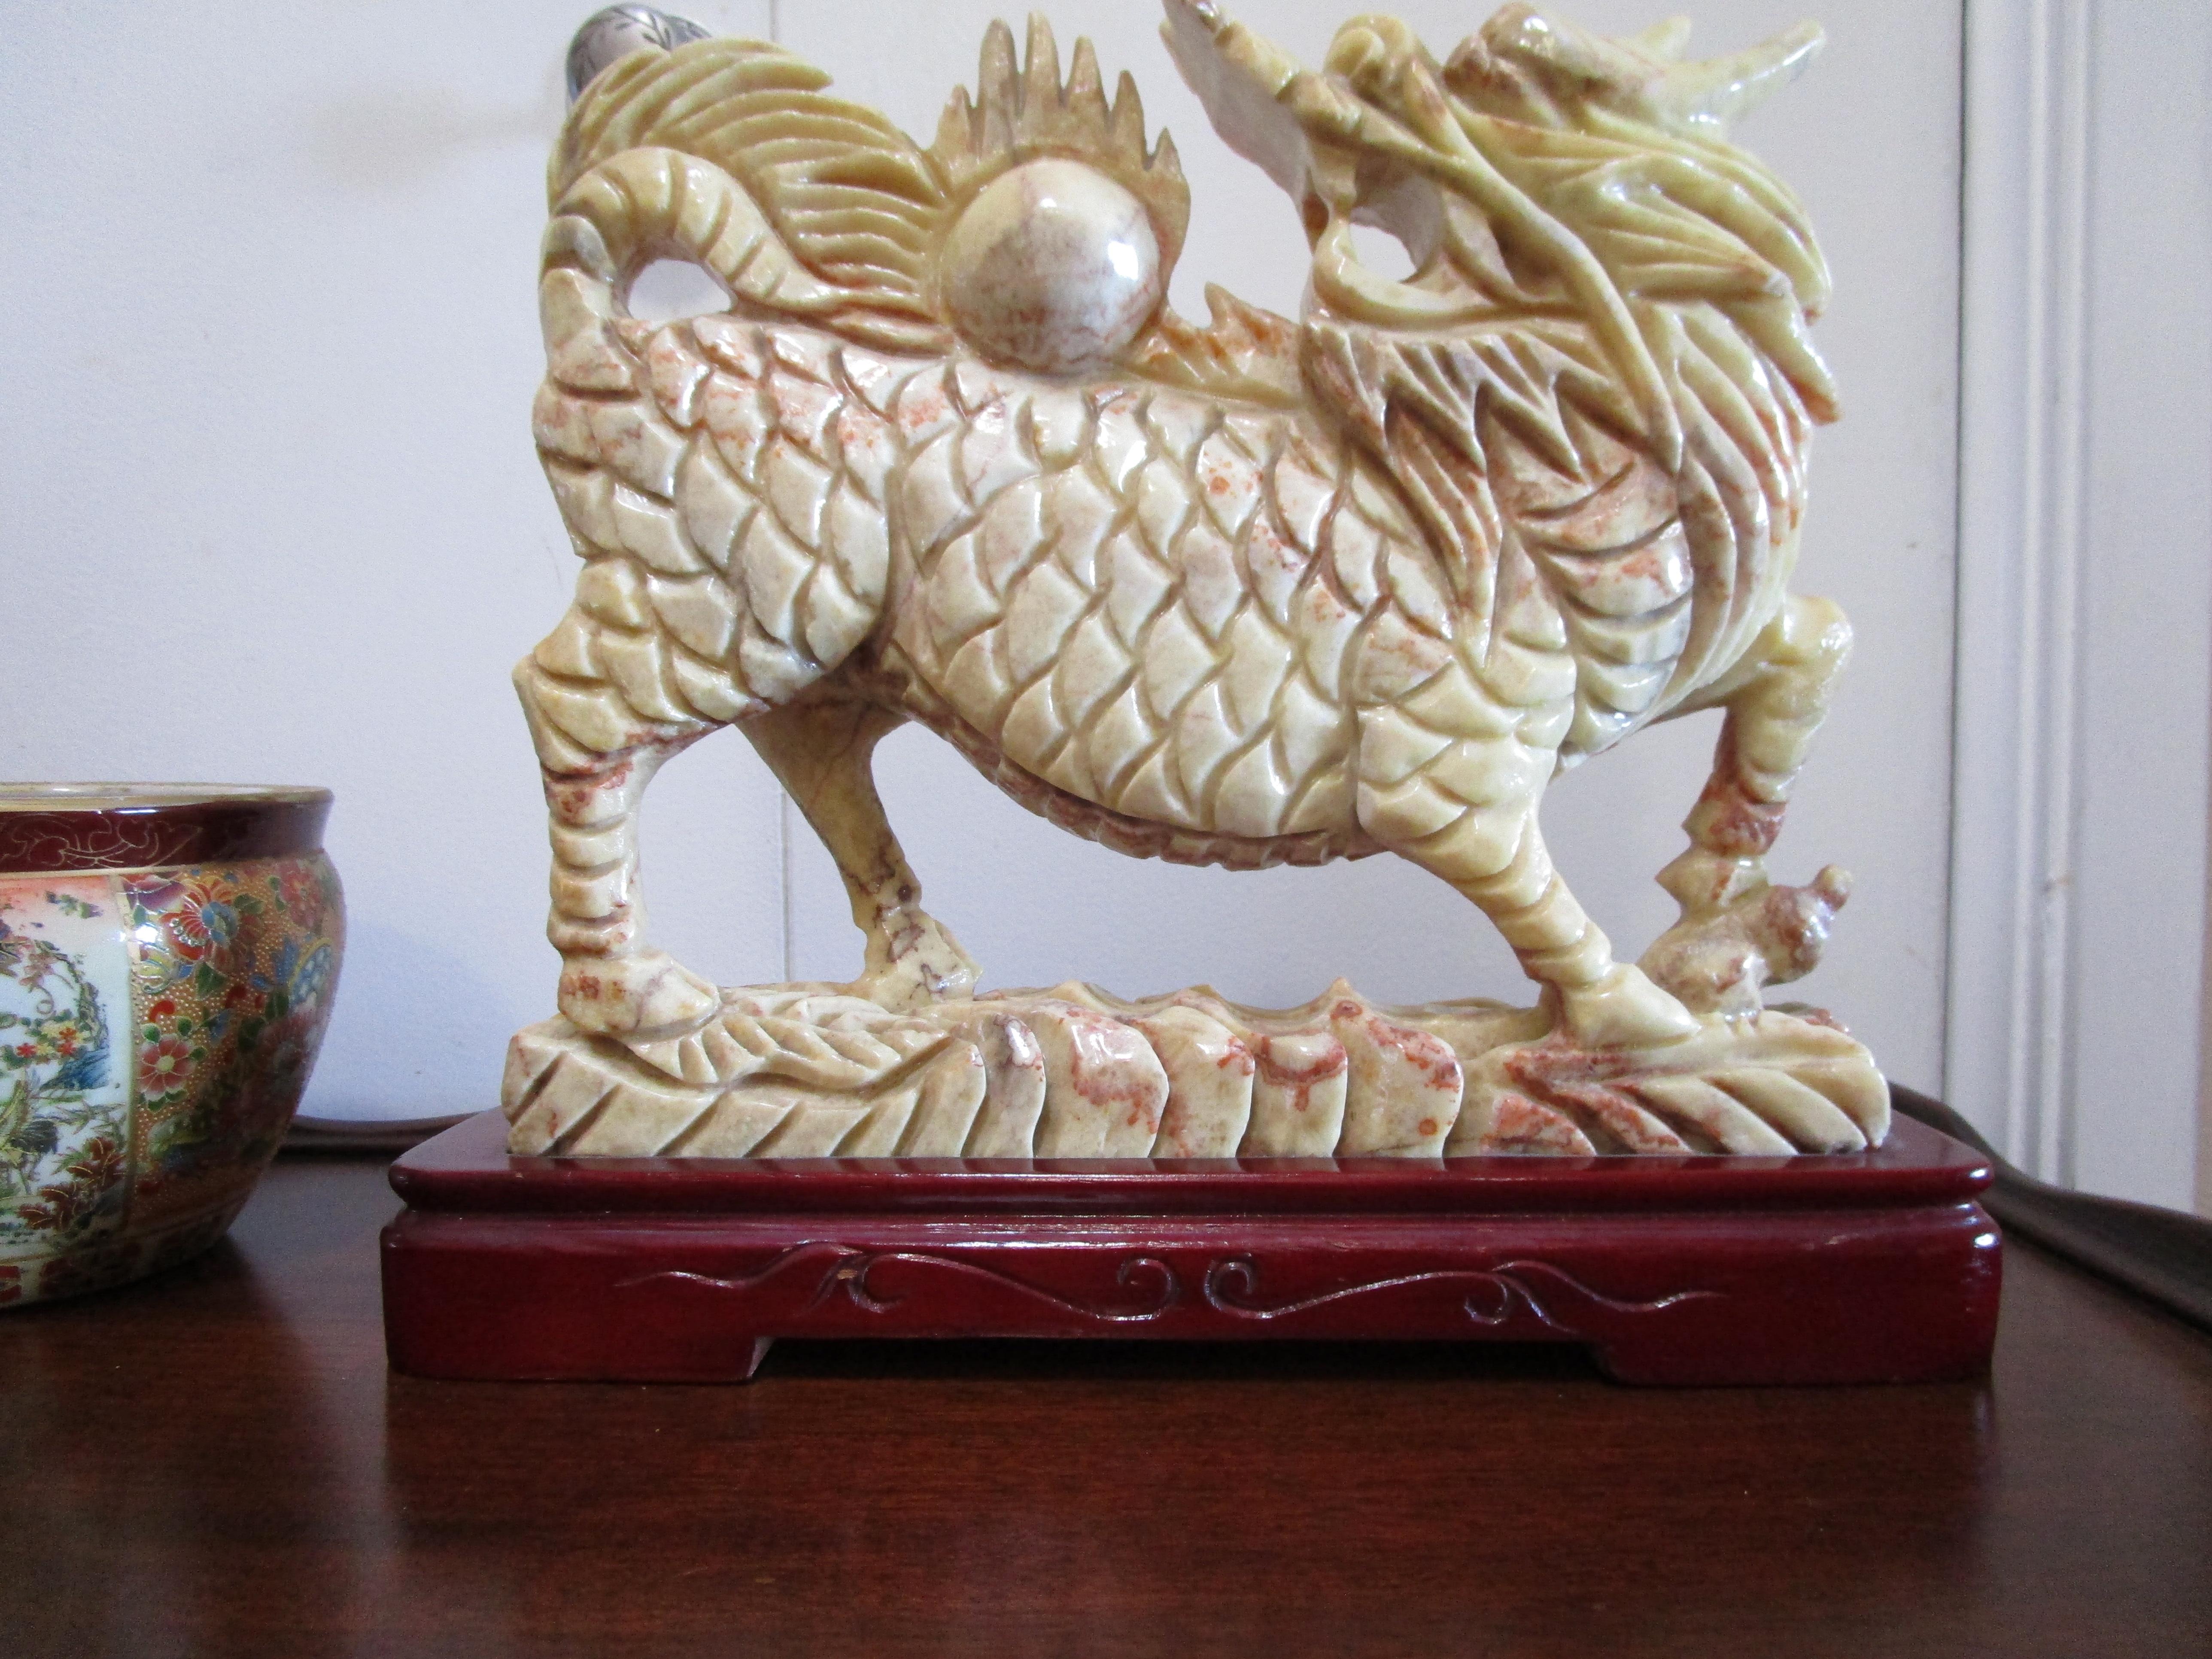 20th Century Hand Carved Marble Statue of Qilin, Chinese Mythical Beast on Rosewood Base For Sale